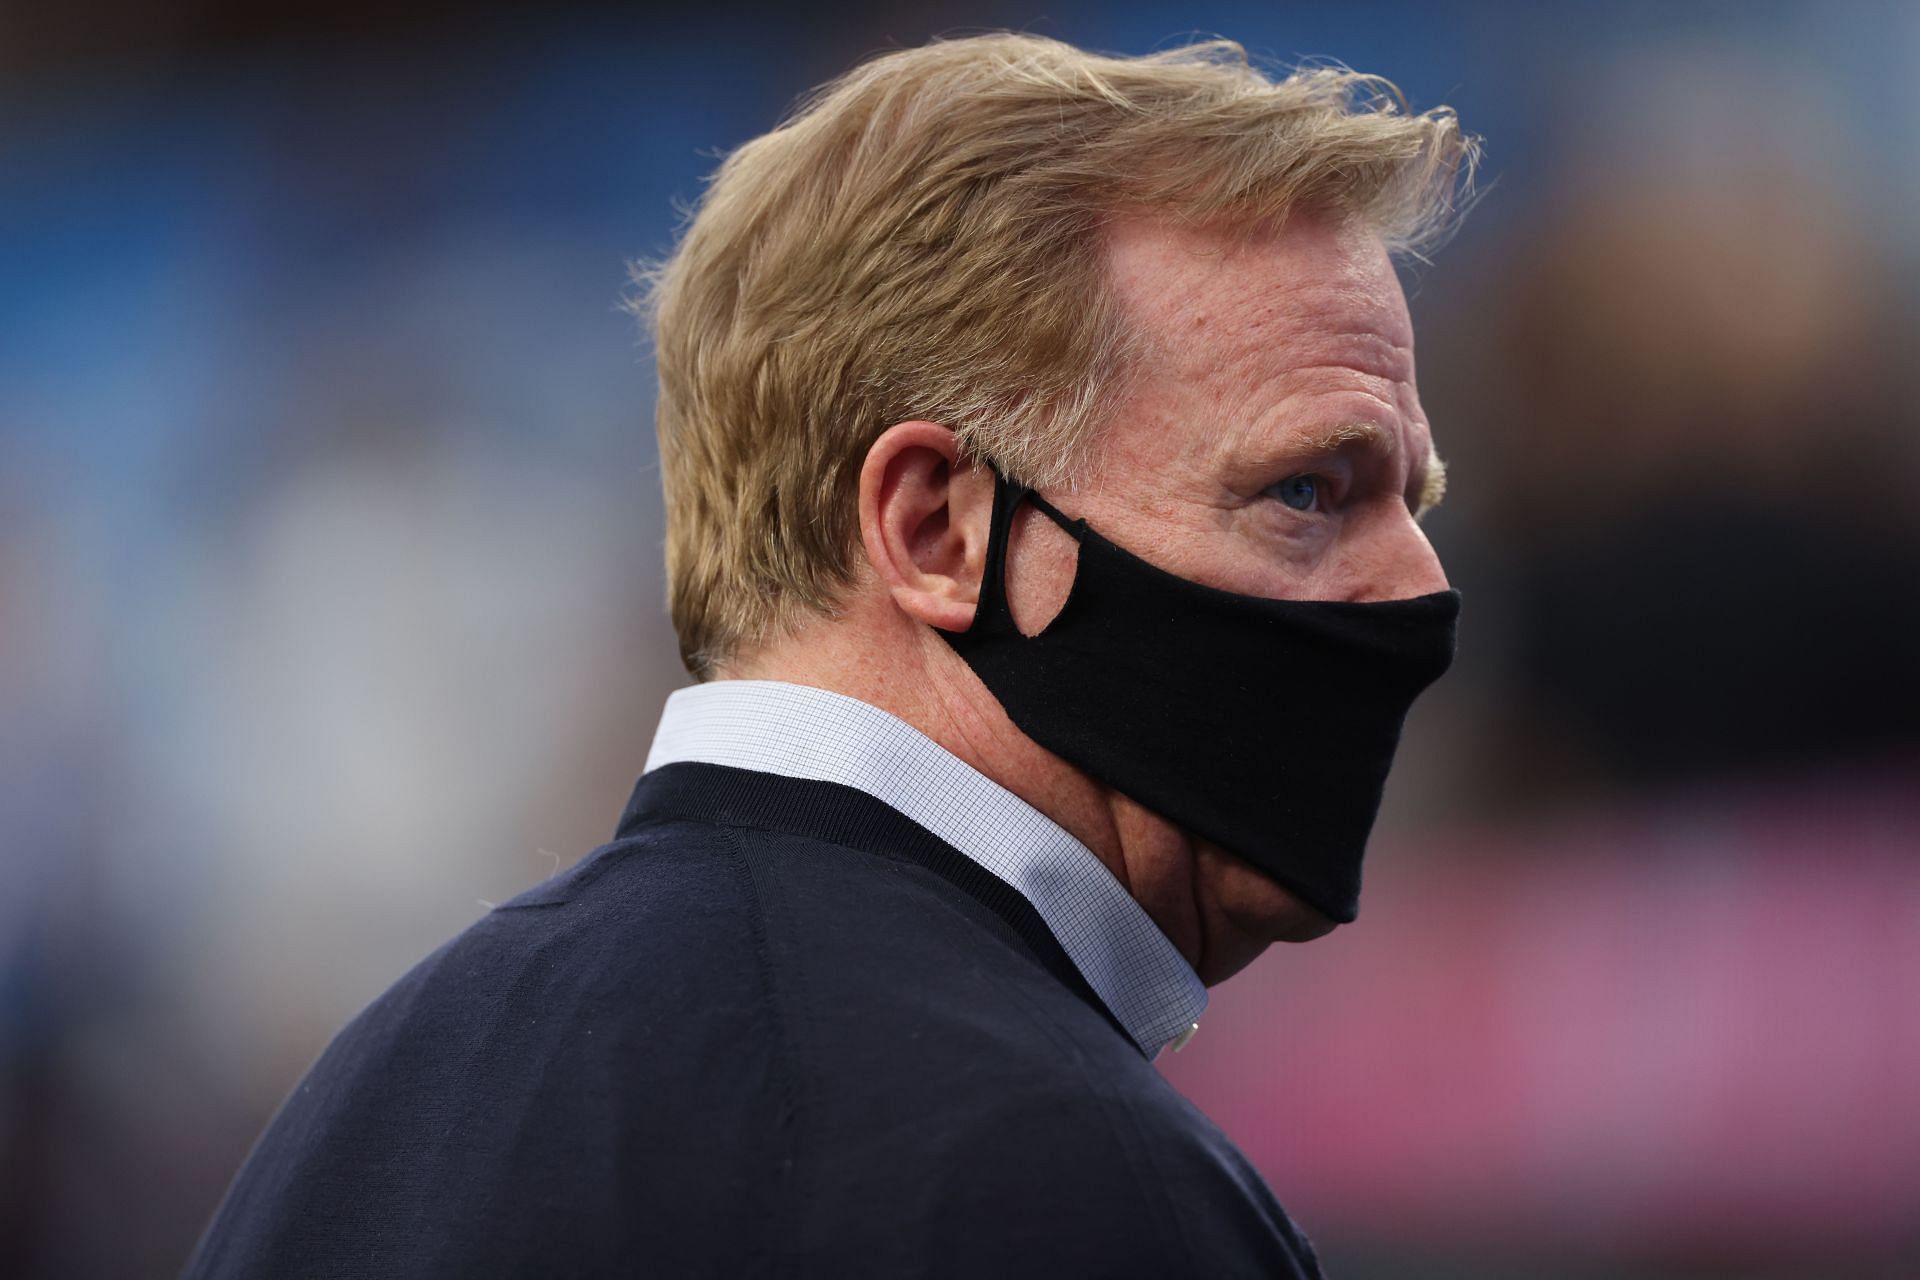 NFL Commissioner Roger Goodell attends Las Vegas Raiders v Los Angeles Chargers